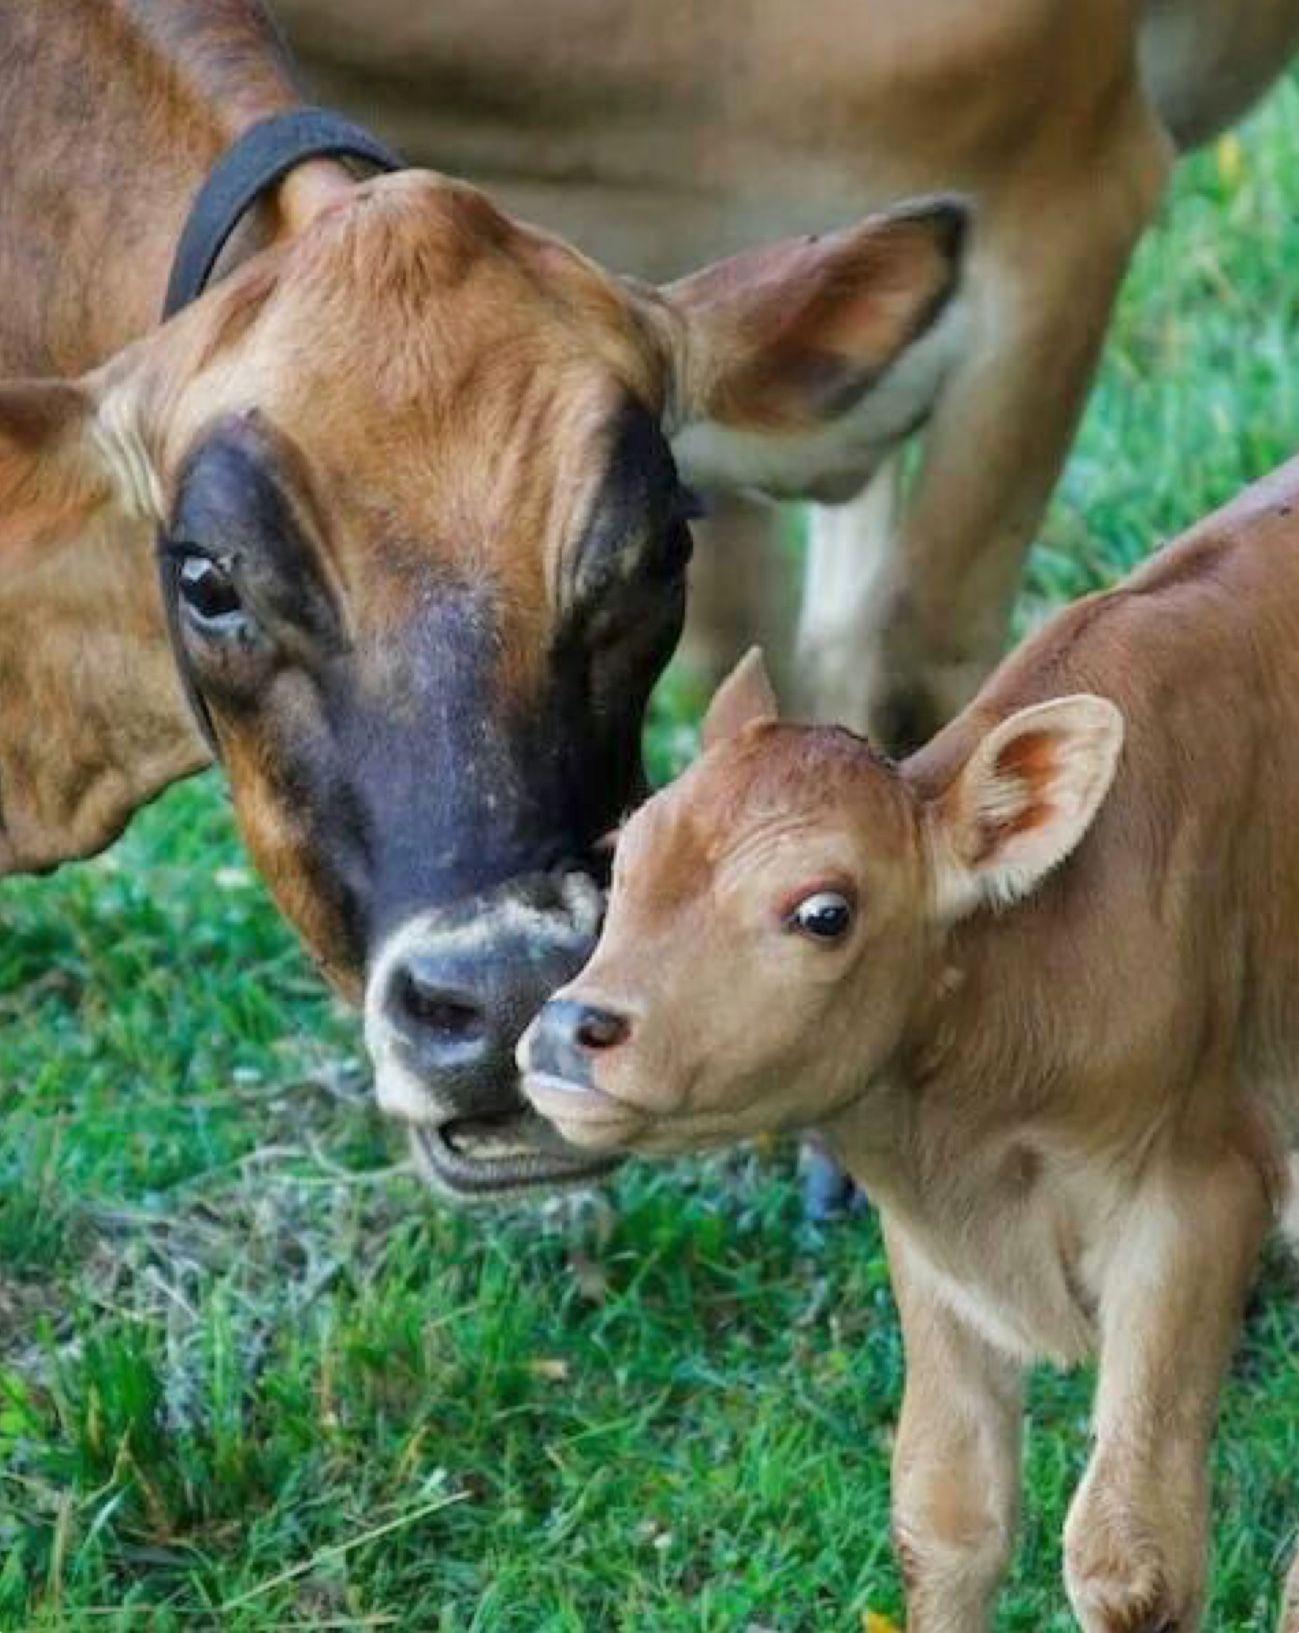 Mother love: A cow checking on her cute calf. Animals